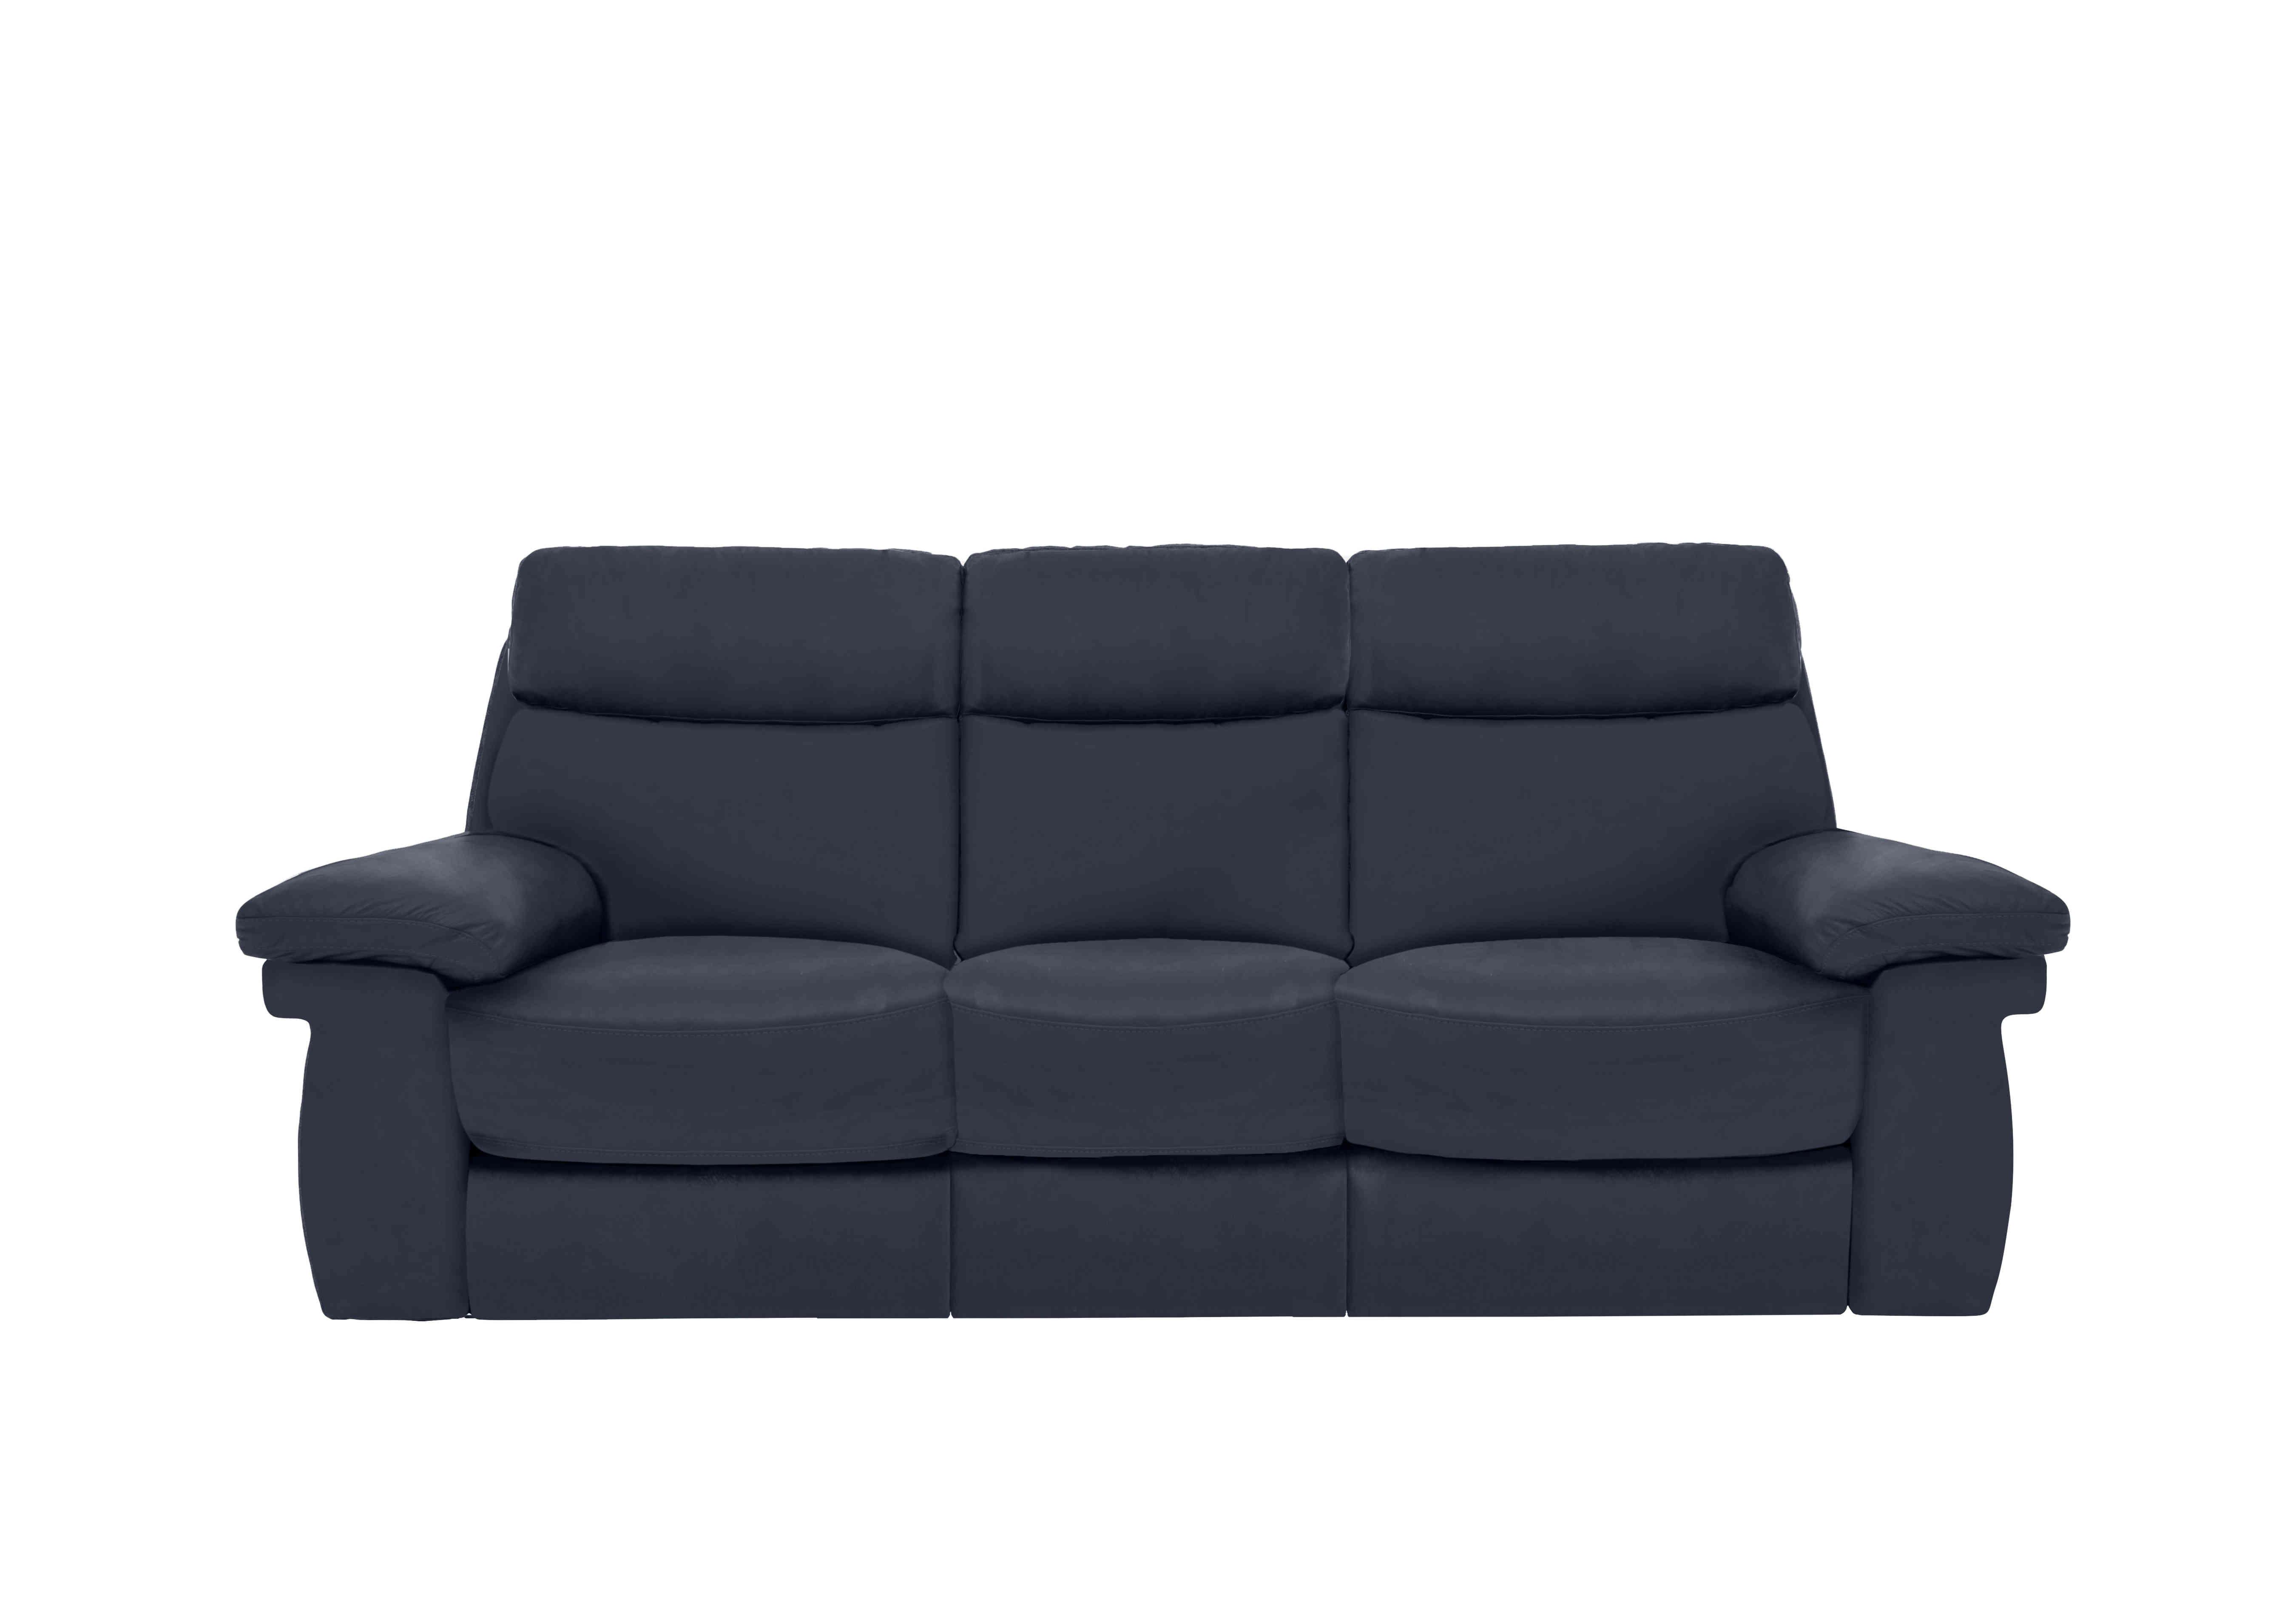 Serene 3 Seater Leather Power Recliner Sofa with Drop Down Table, Power Headrests and Power Lumbar in Bx-036c Navy on Furniture Village